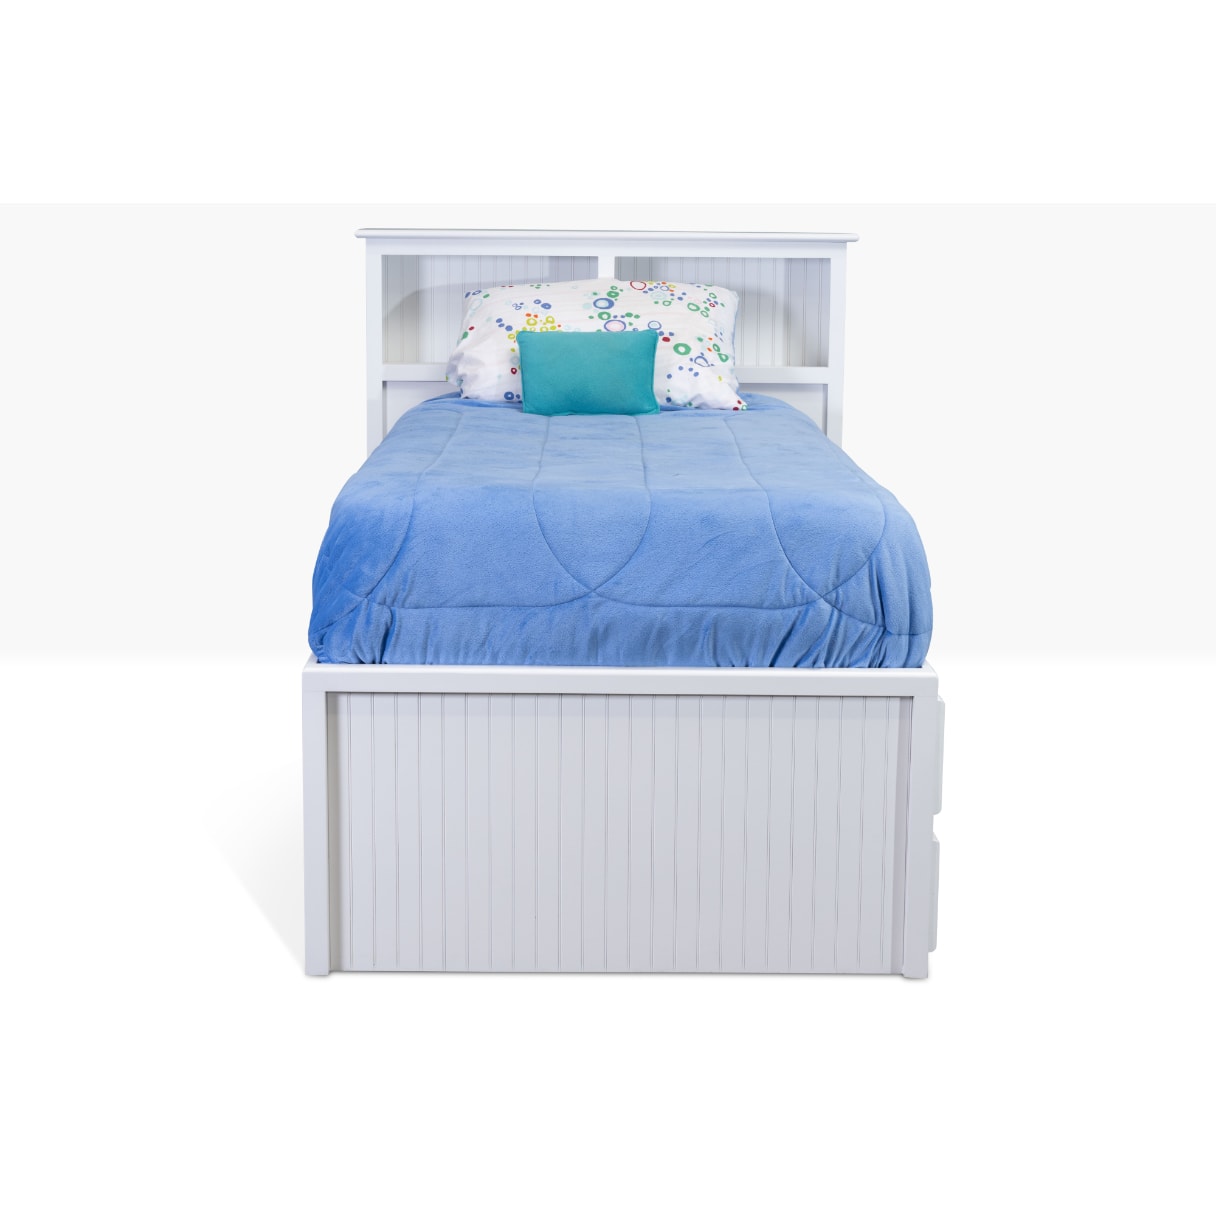 Acadia Cottage Storage Bed with 6 drawers on one side and a book case headboard for storage. The unit has a bead board end. Pictured in white from the front.